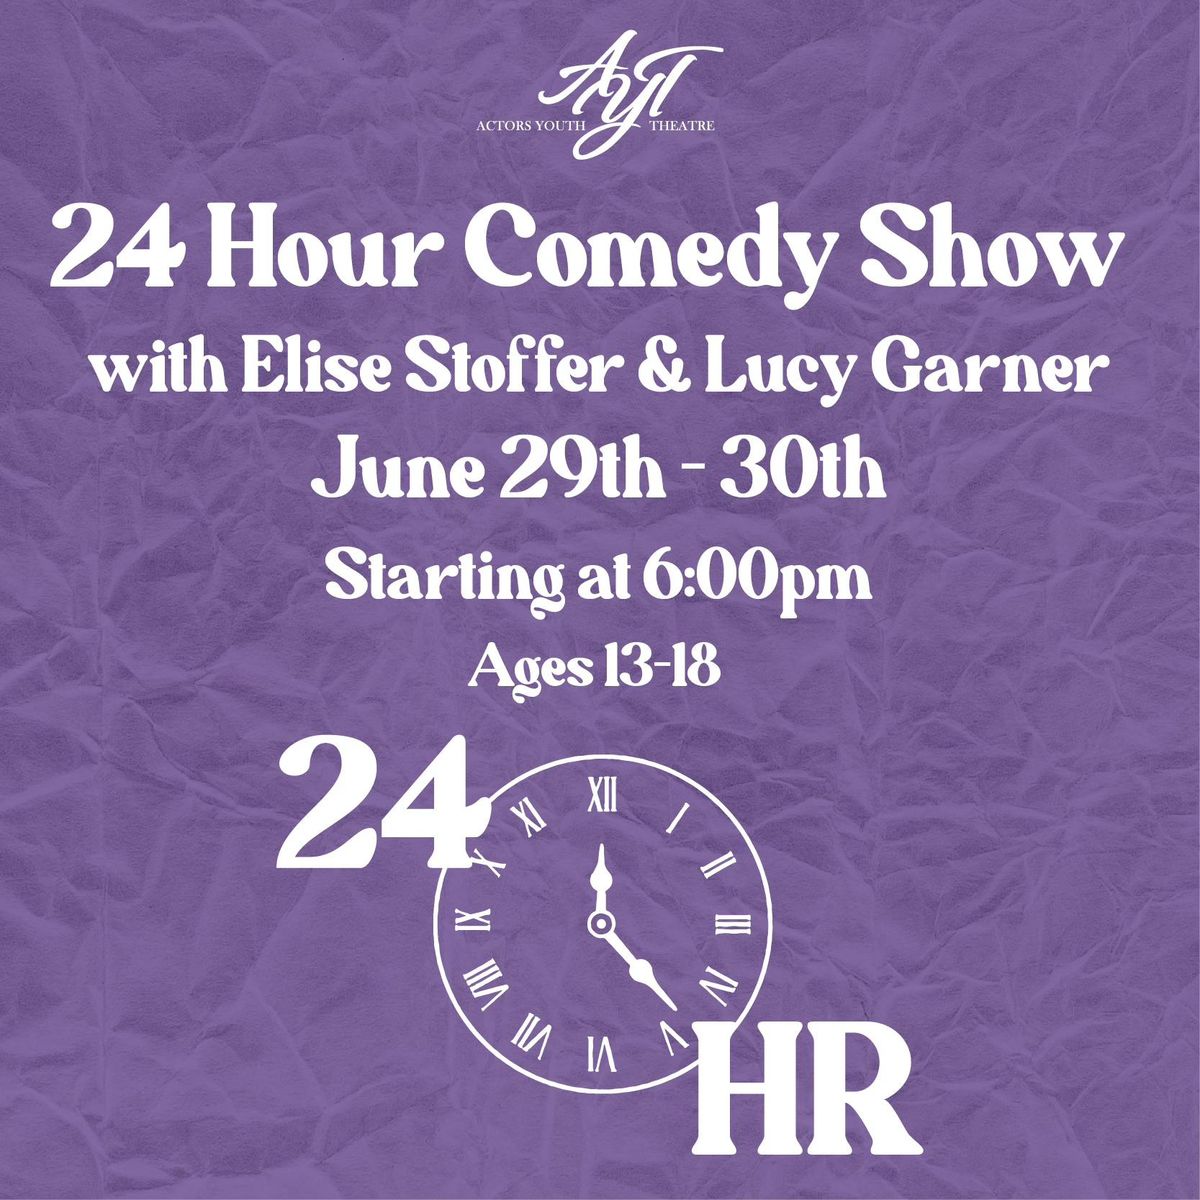 Our 24hr Comedy Show with Elise and Lucy